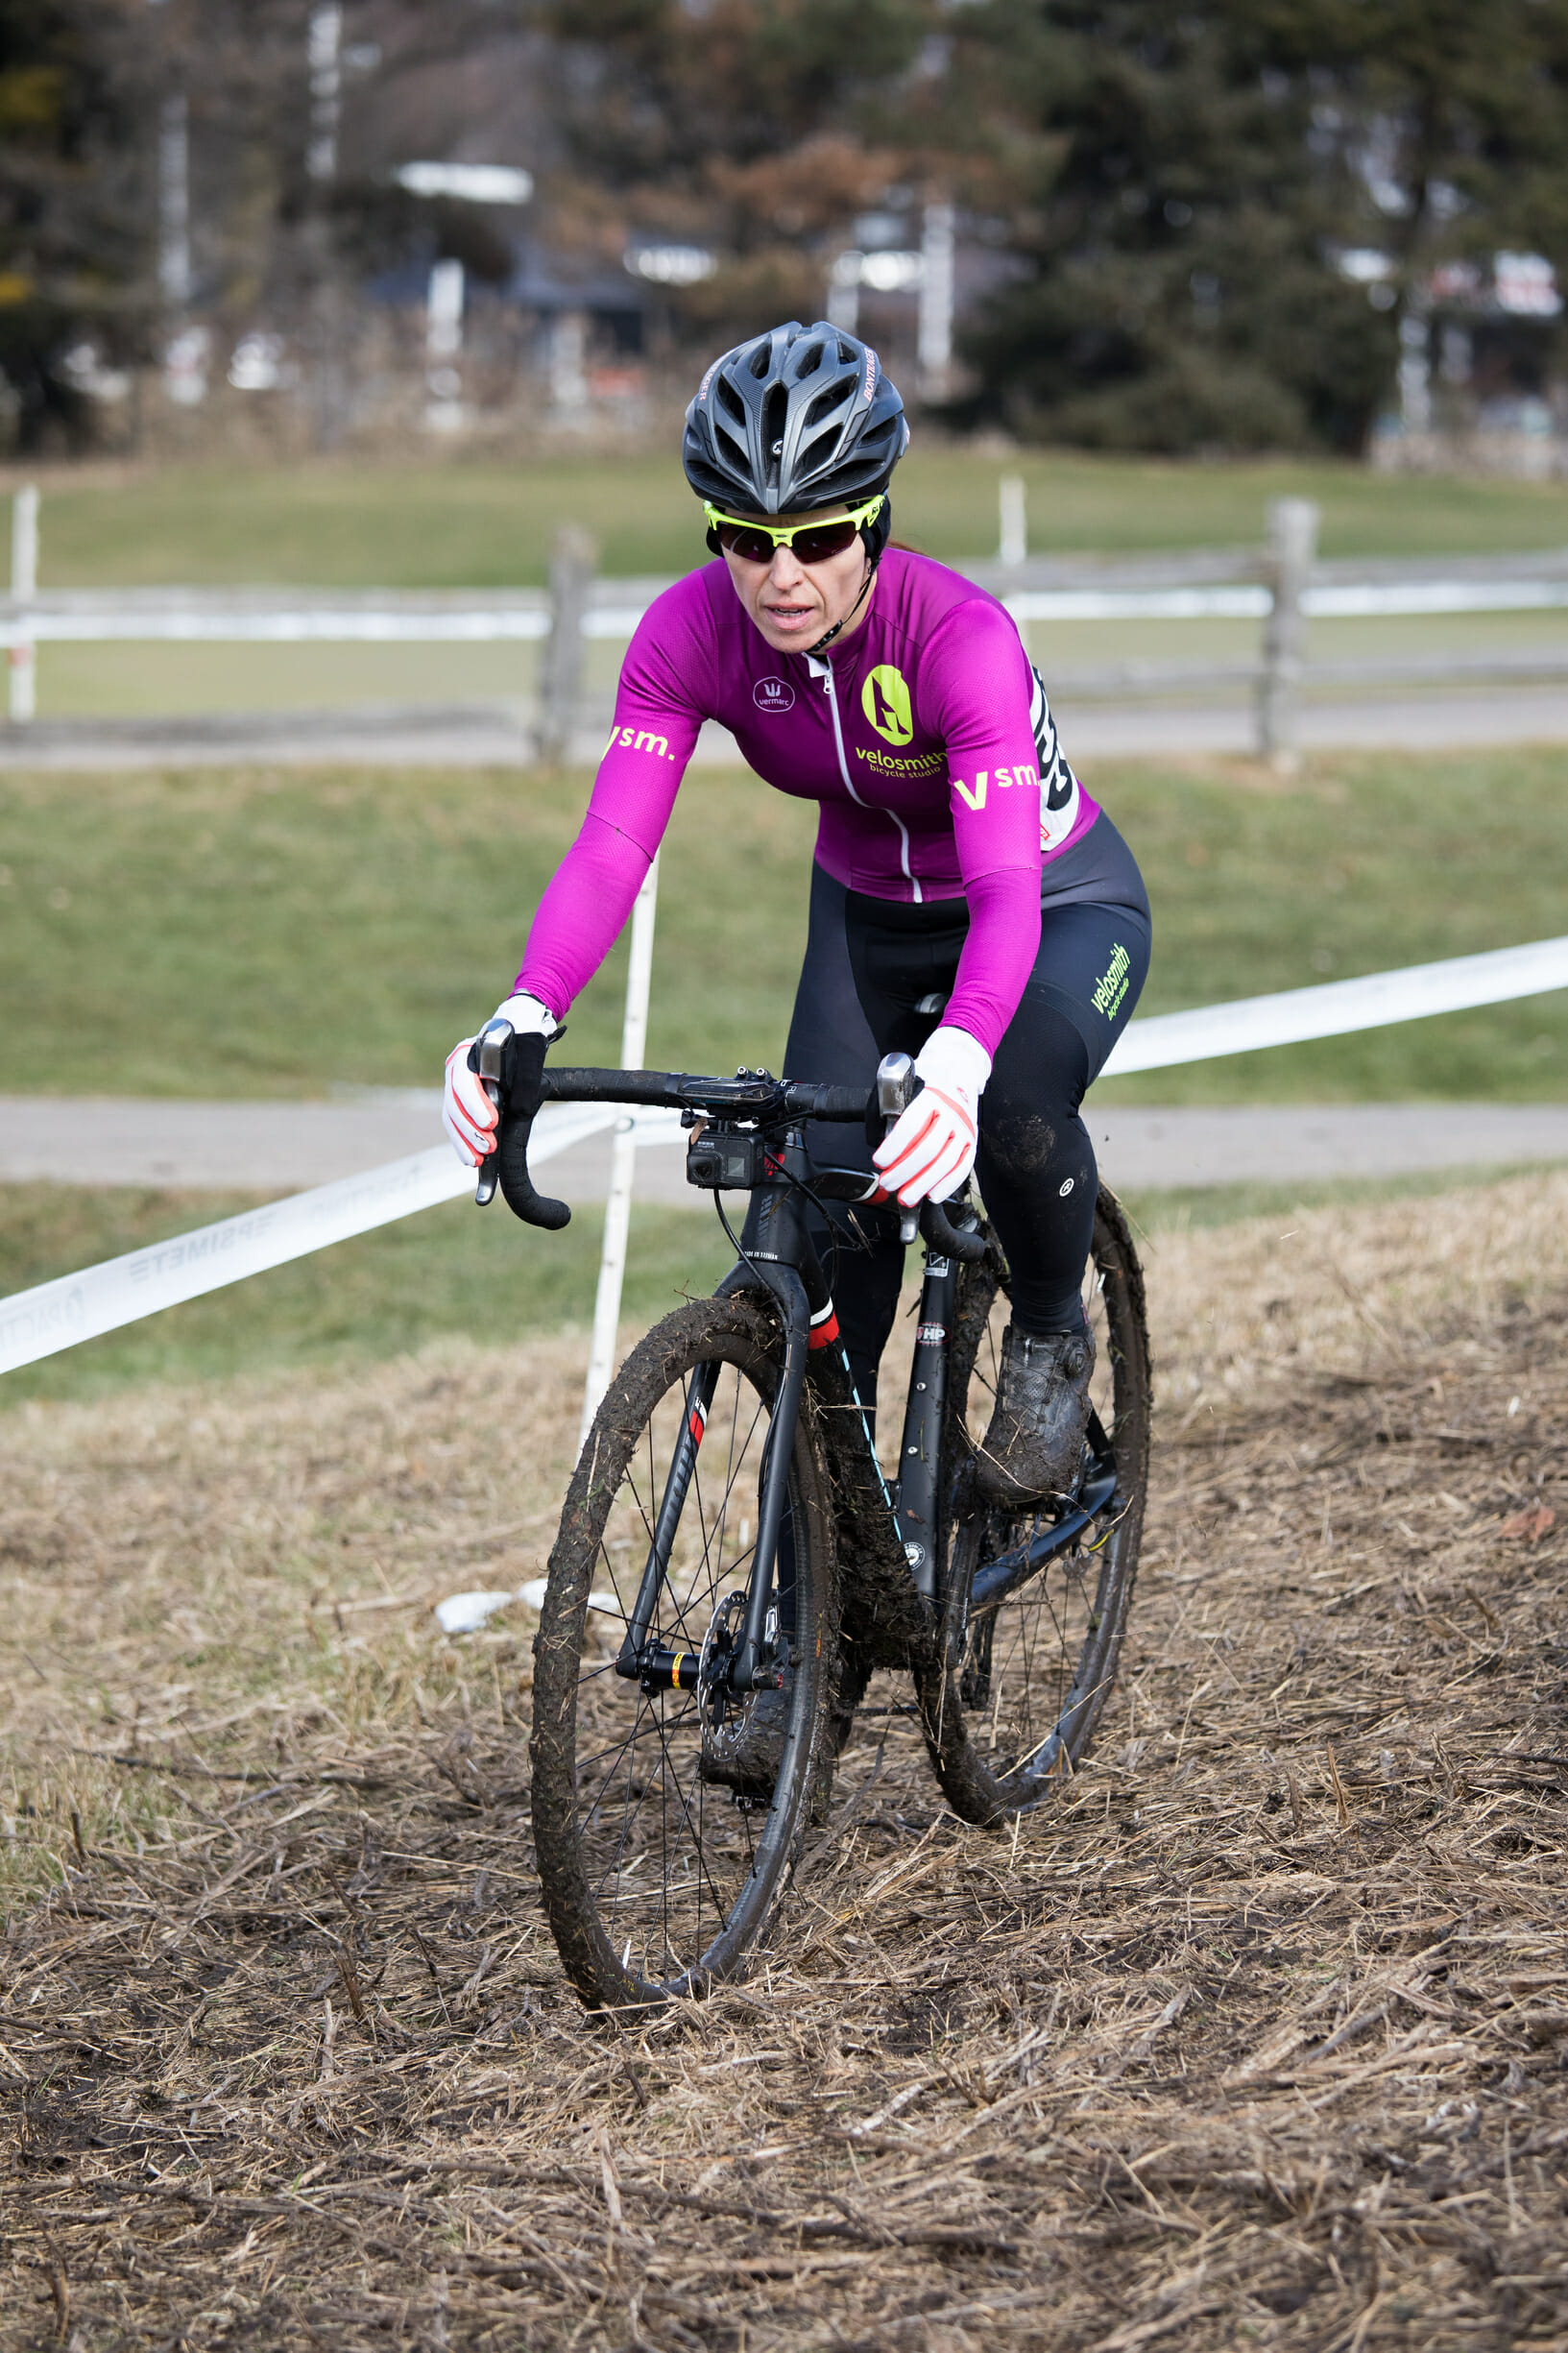 Theia Friestedt racing cyclocross on very dry grass mixed with mud on Trek Boone